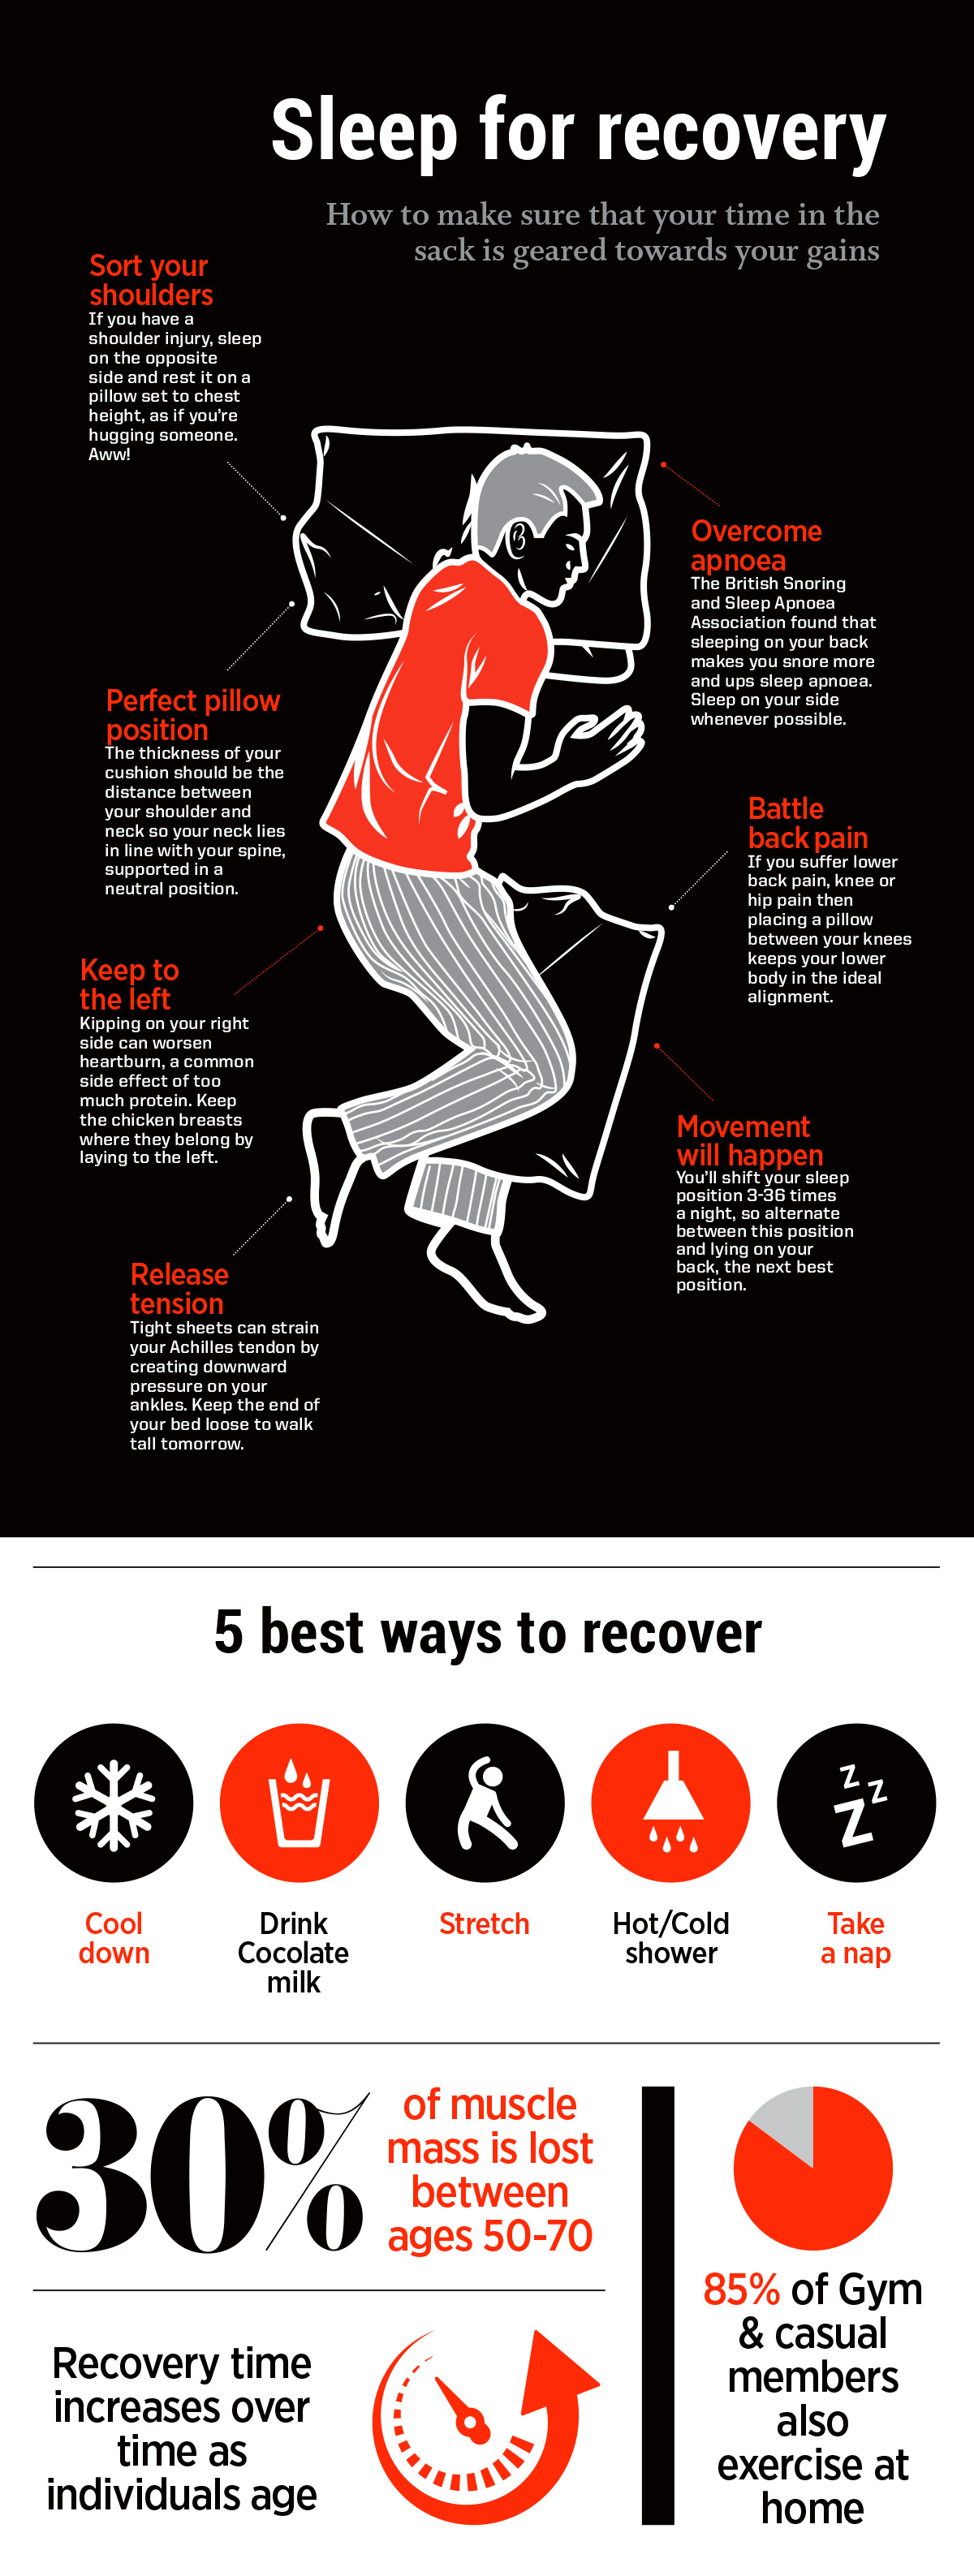 7 Tips For Sleeping Your Way to Better Gym Recovery [Infographic]